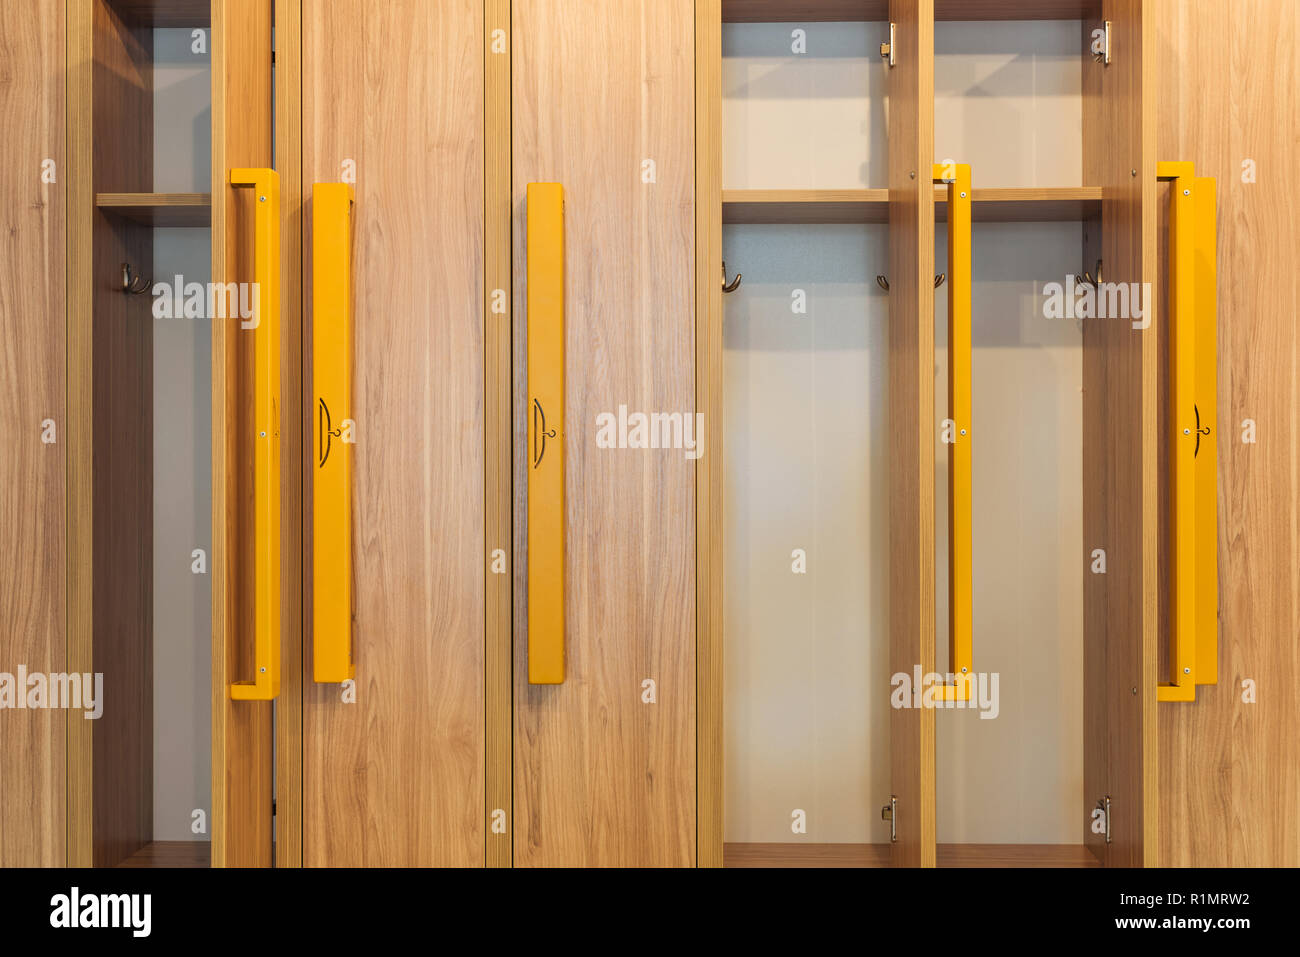 full frame view of wooden lockers with yellow handles in kindergarten cloakroom Stock Photo